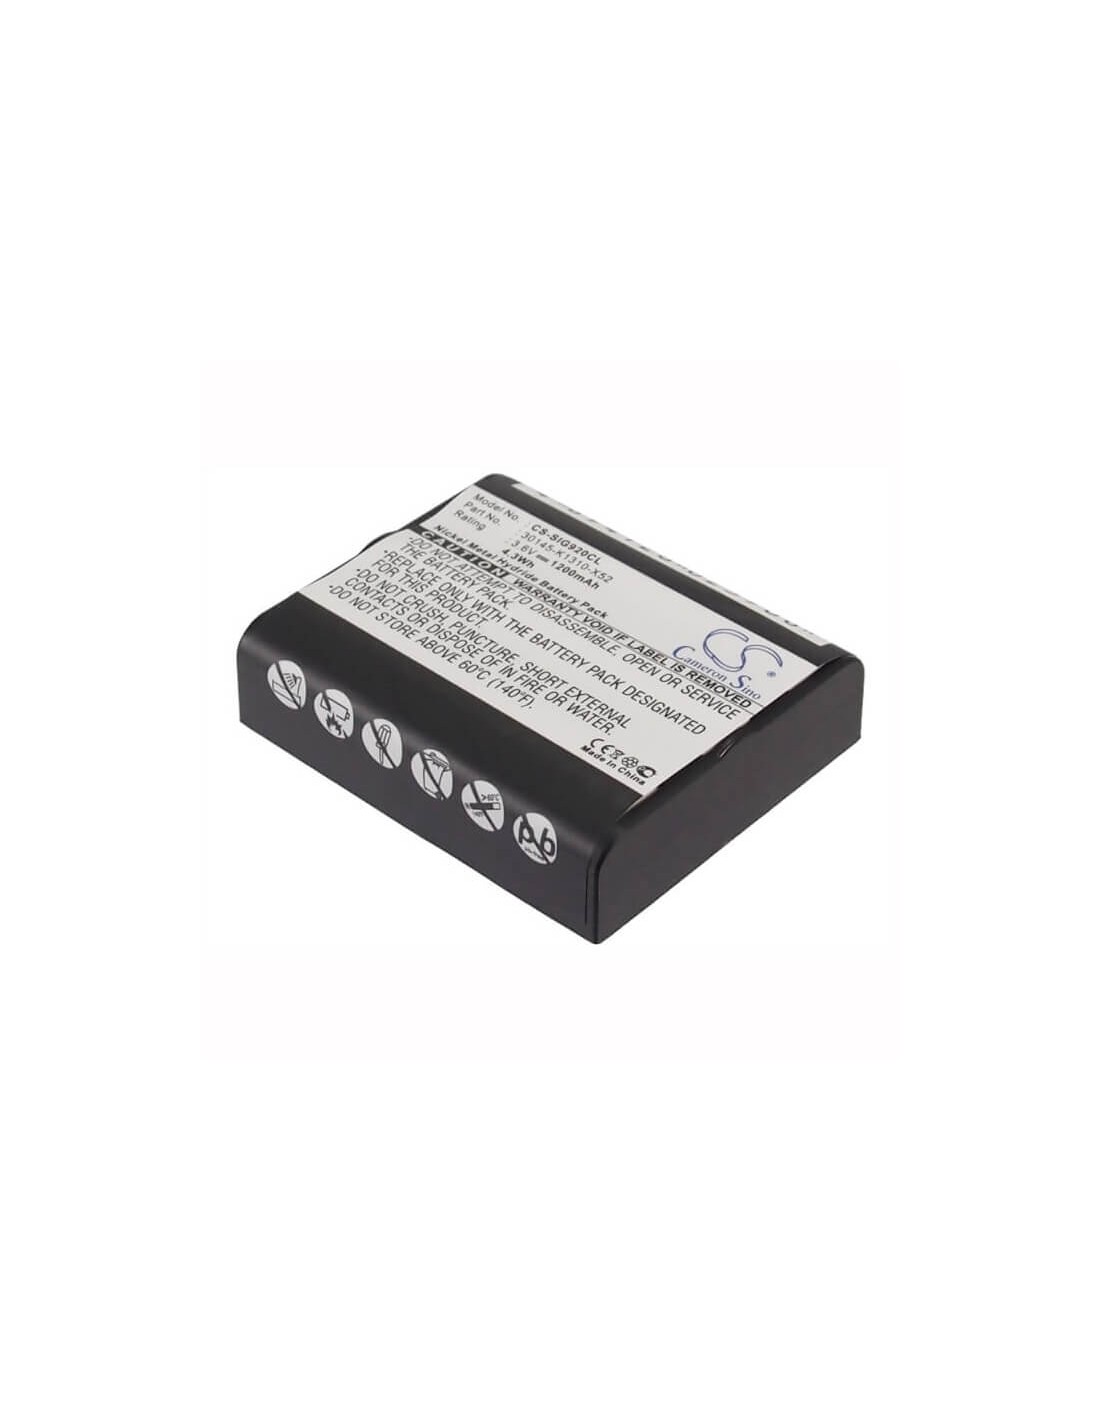 Battery for Grundig, Cp500, Cp510, Cp700, Cp800, 3.6V, 1200mAh - 4.32Wh